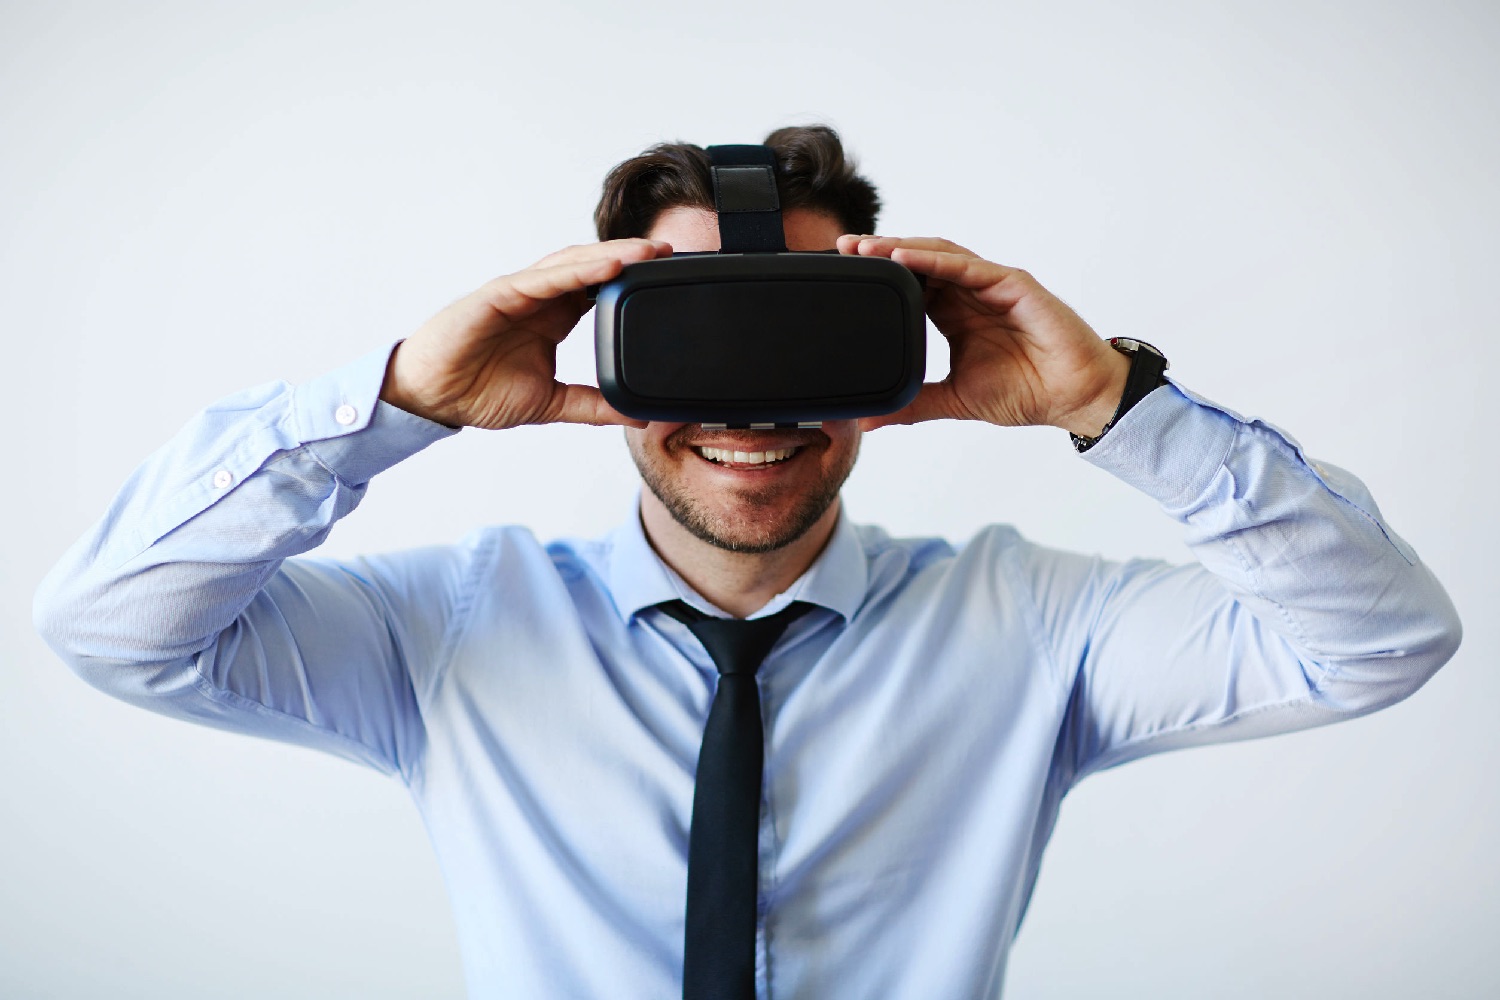 Hyndi Pron - With 500,000 Viewers Per Day, VR is the Fastest-Growing Category on Pornhub  | Digital Trends